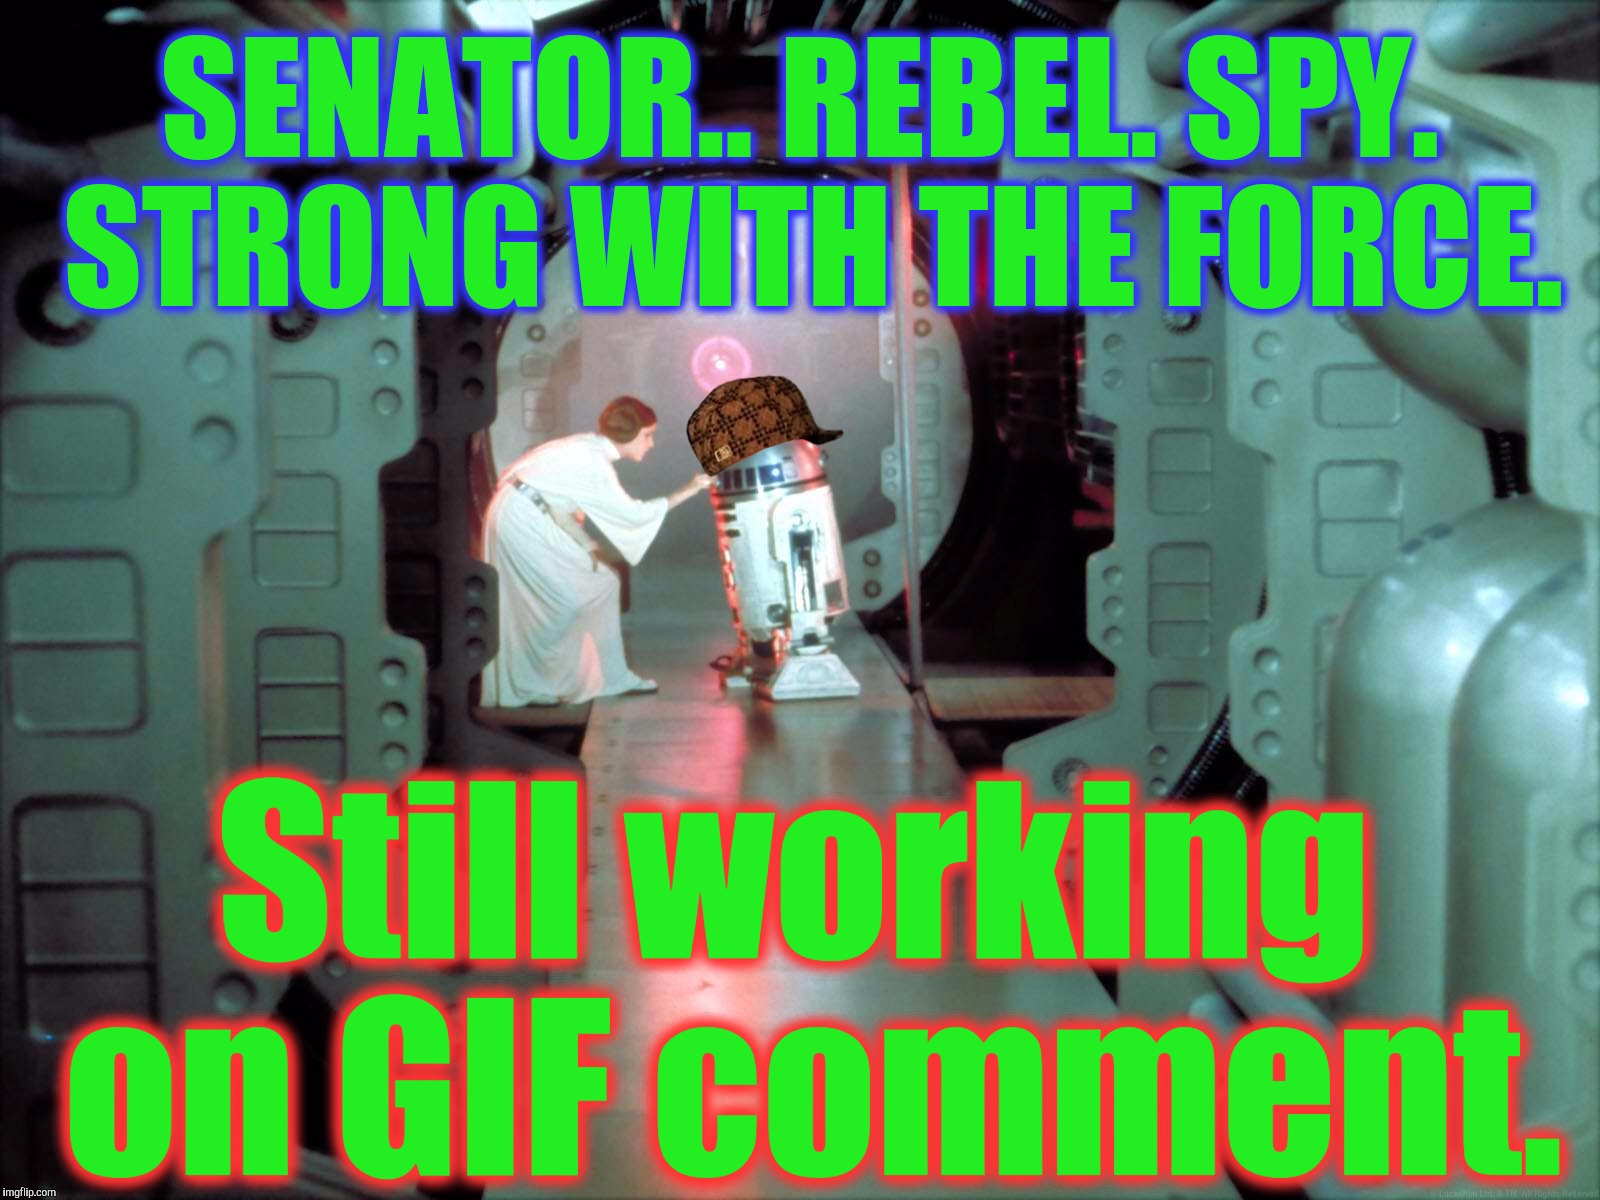 R2-D2 Totally Could Have HELPED... | SENATOR.. REBEL. SPY. STRONG WITH THE FORCE. Still working on GIF comment. | image tagged in princess leia,white privilege,white people,first world problems,red leader star wars - fliplyfe - thug lyfe meme,funny | made w/ Imgflip meme maker